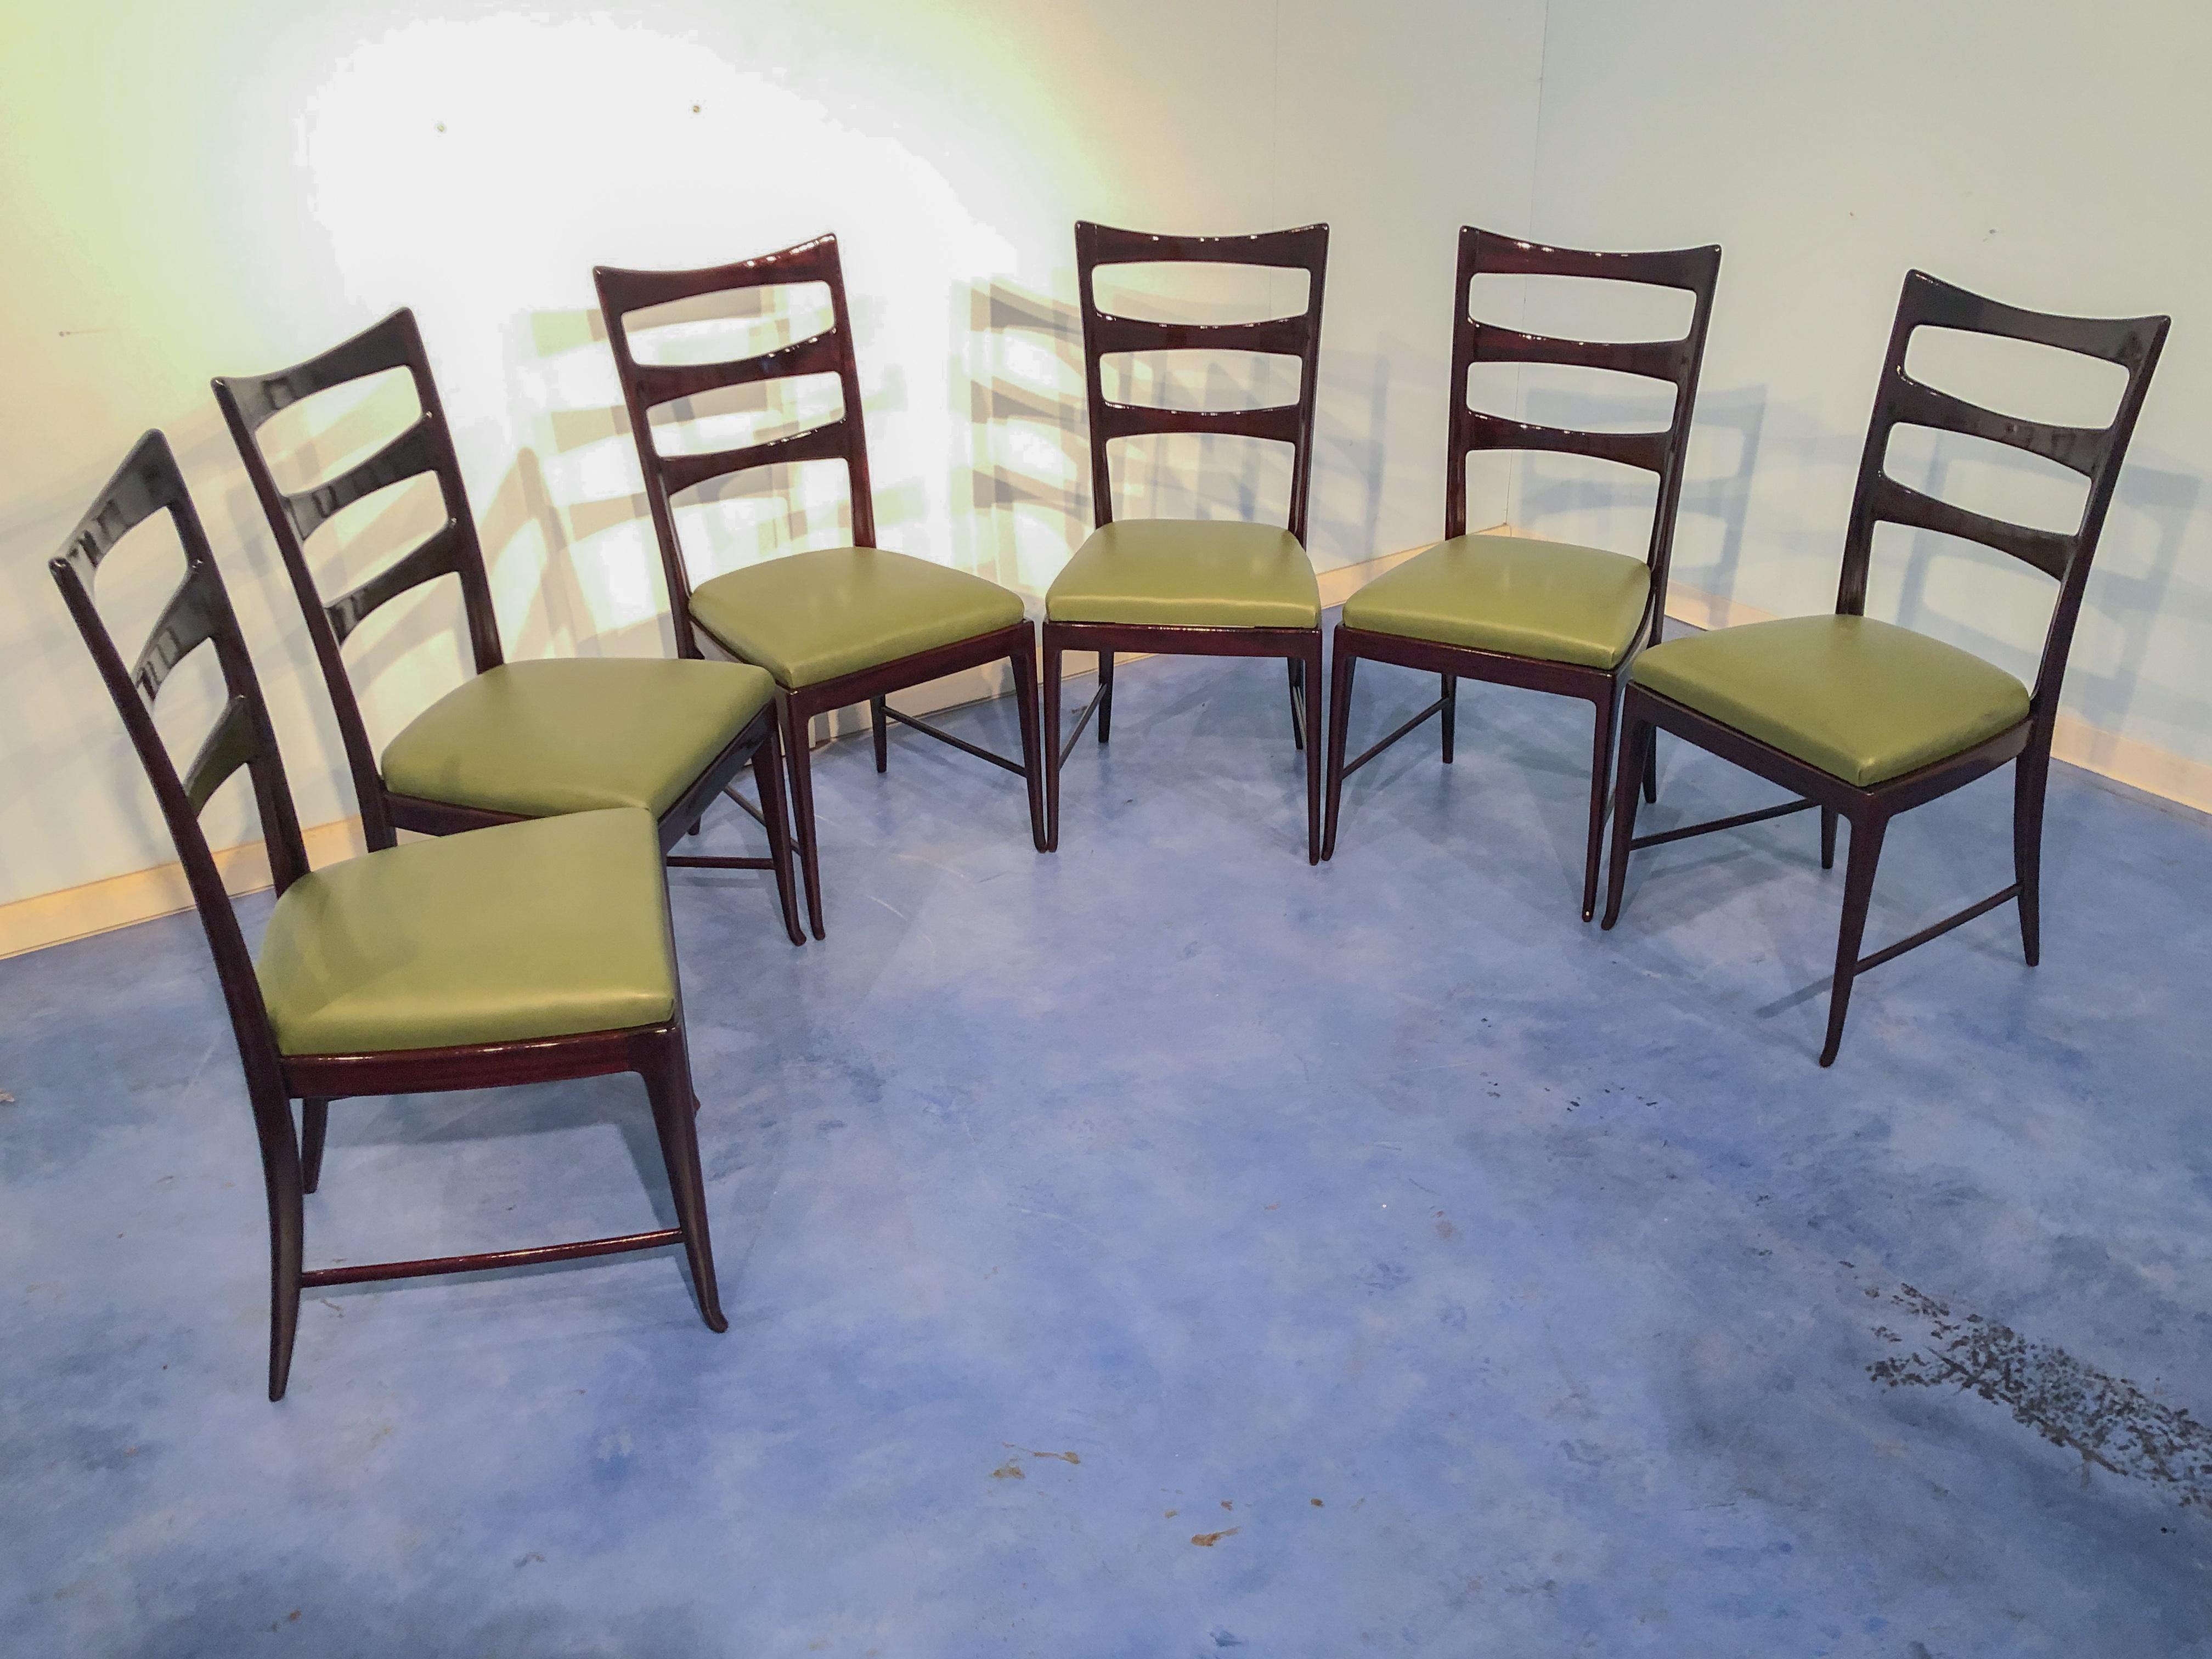 A splendid Mid-Century Modern set of six dining room chairs by Vittorio Dassi, from the 1950s. Elegant line characterized by high backrests. Mahogany structure, beautiful bordeaux color by light. In very good original conditions, recently restored.